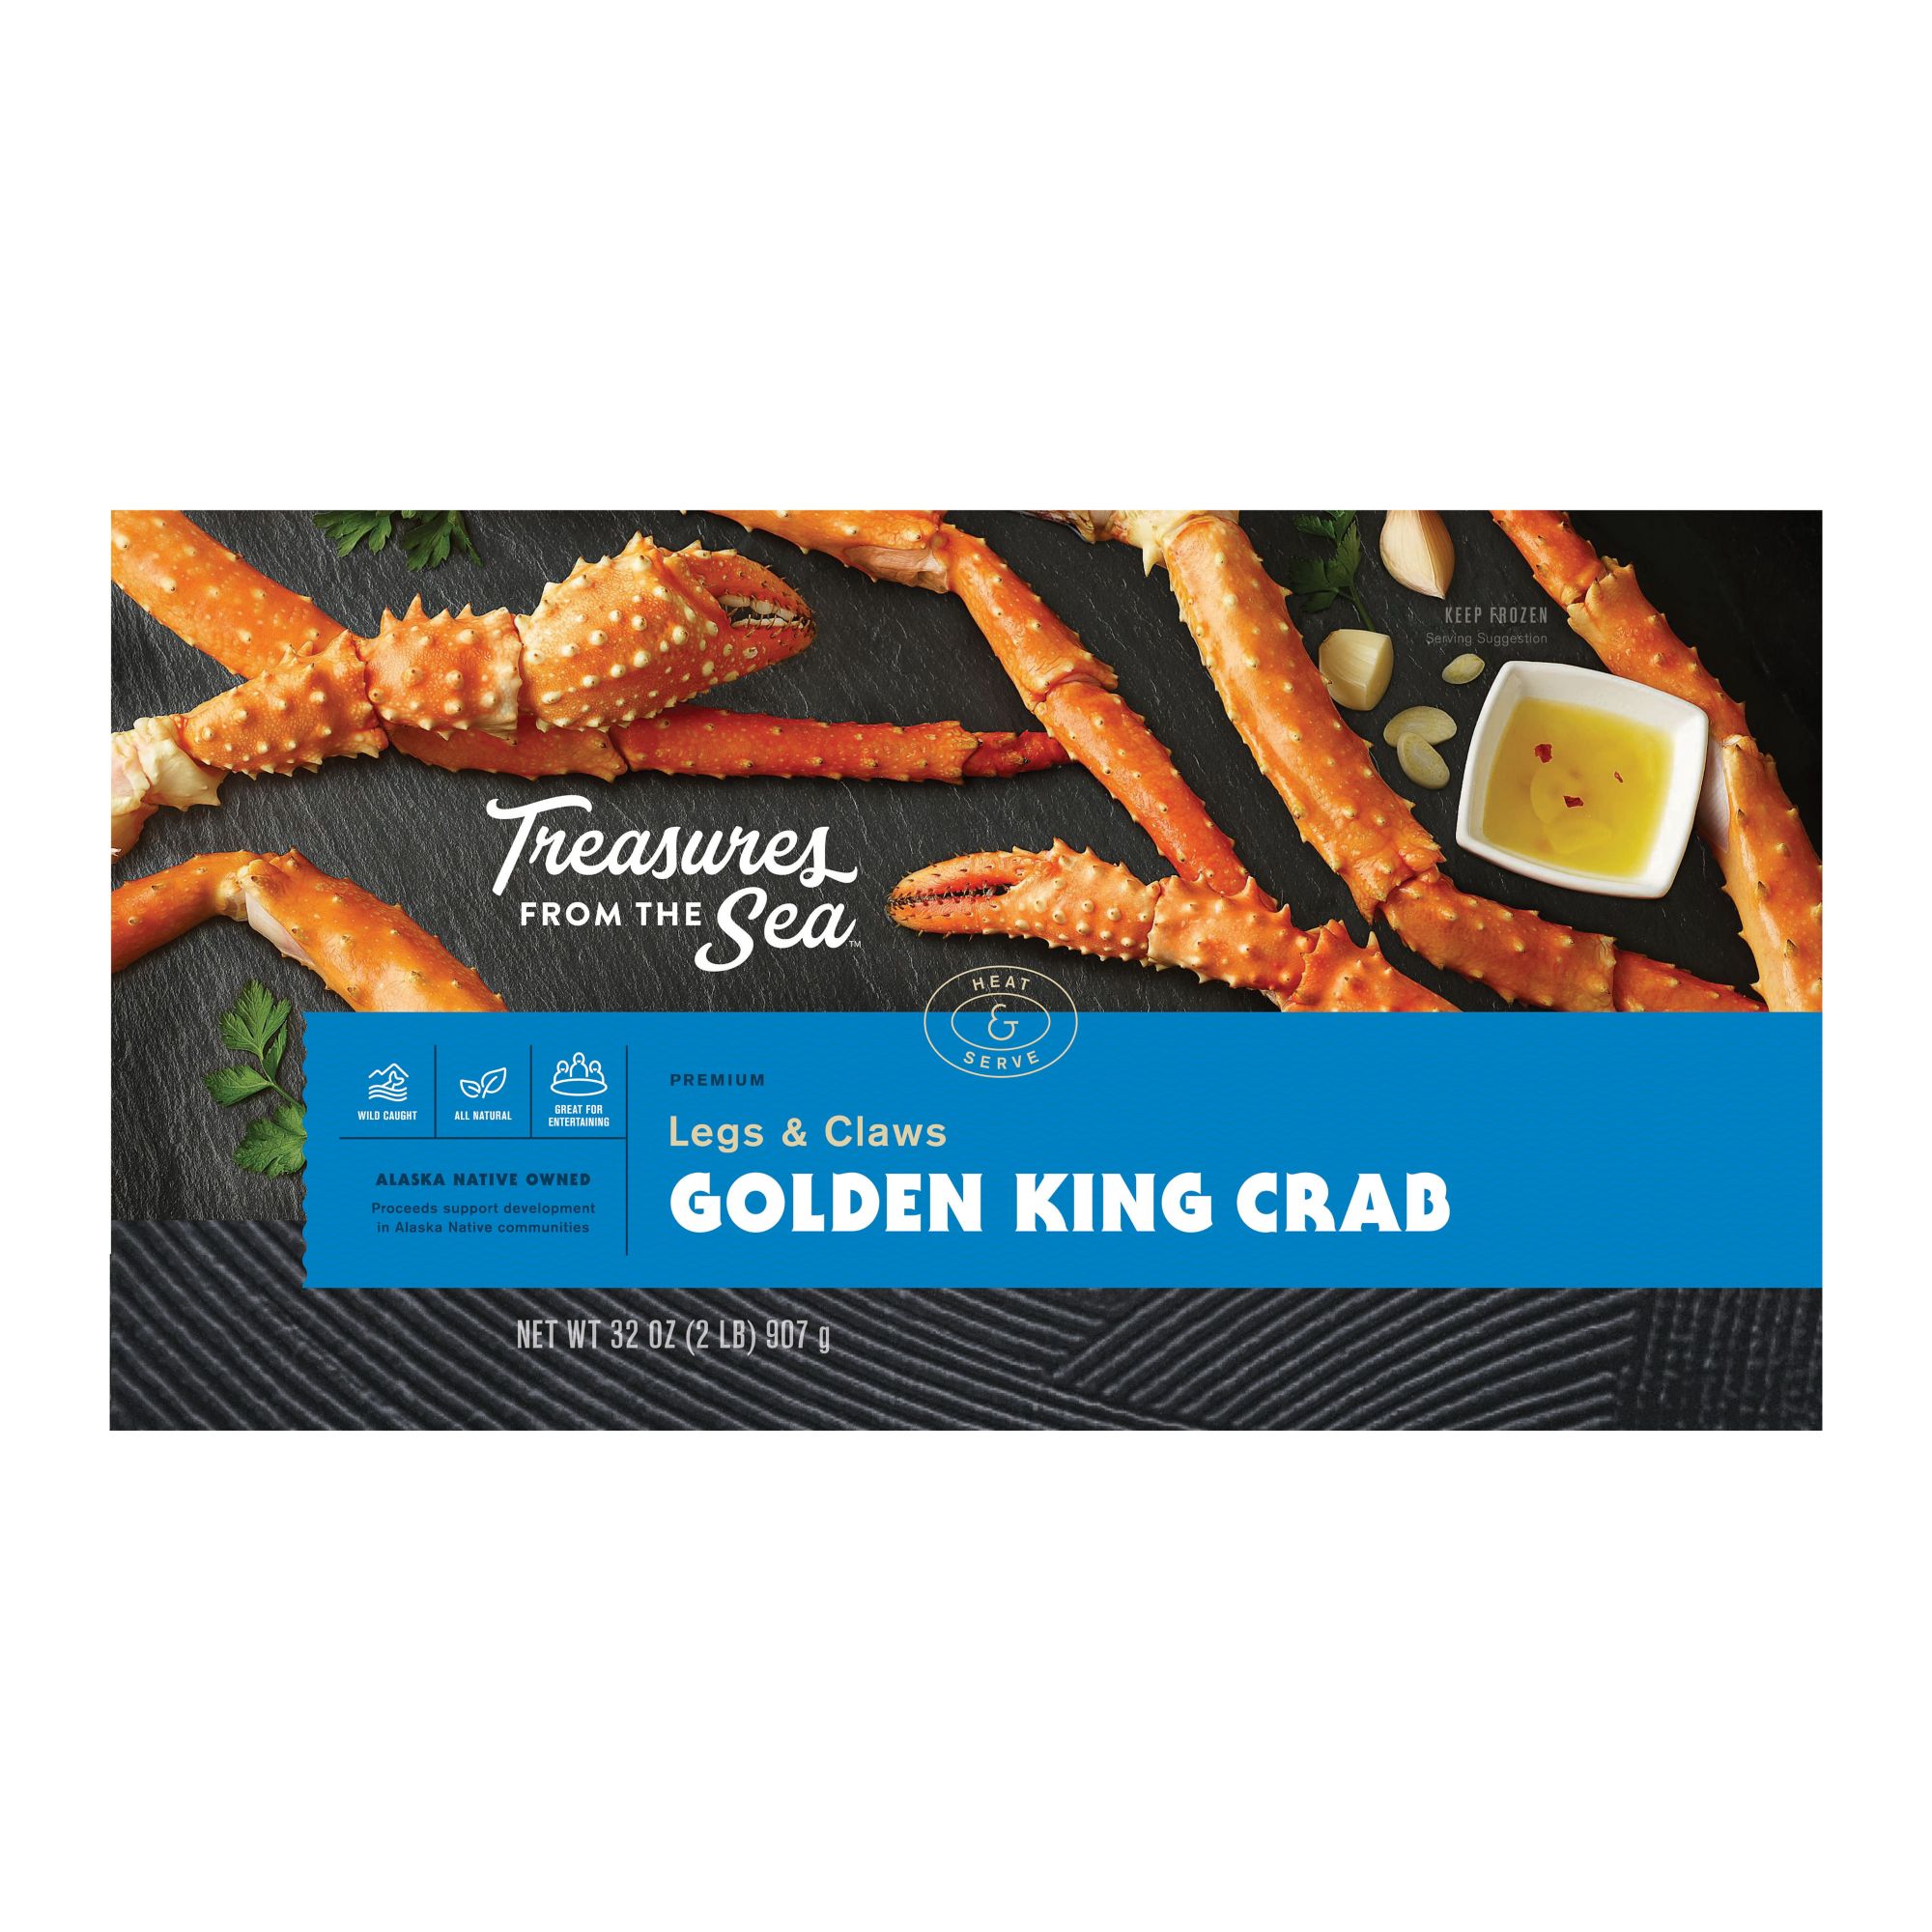 Ronnings - They're here! The new King Crab orange collection from